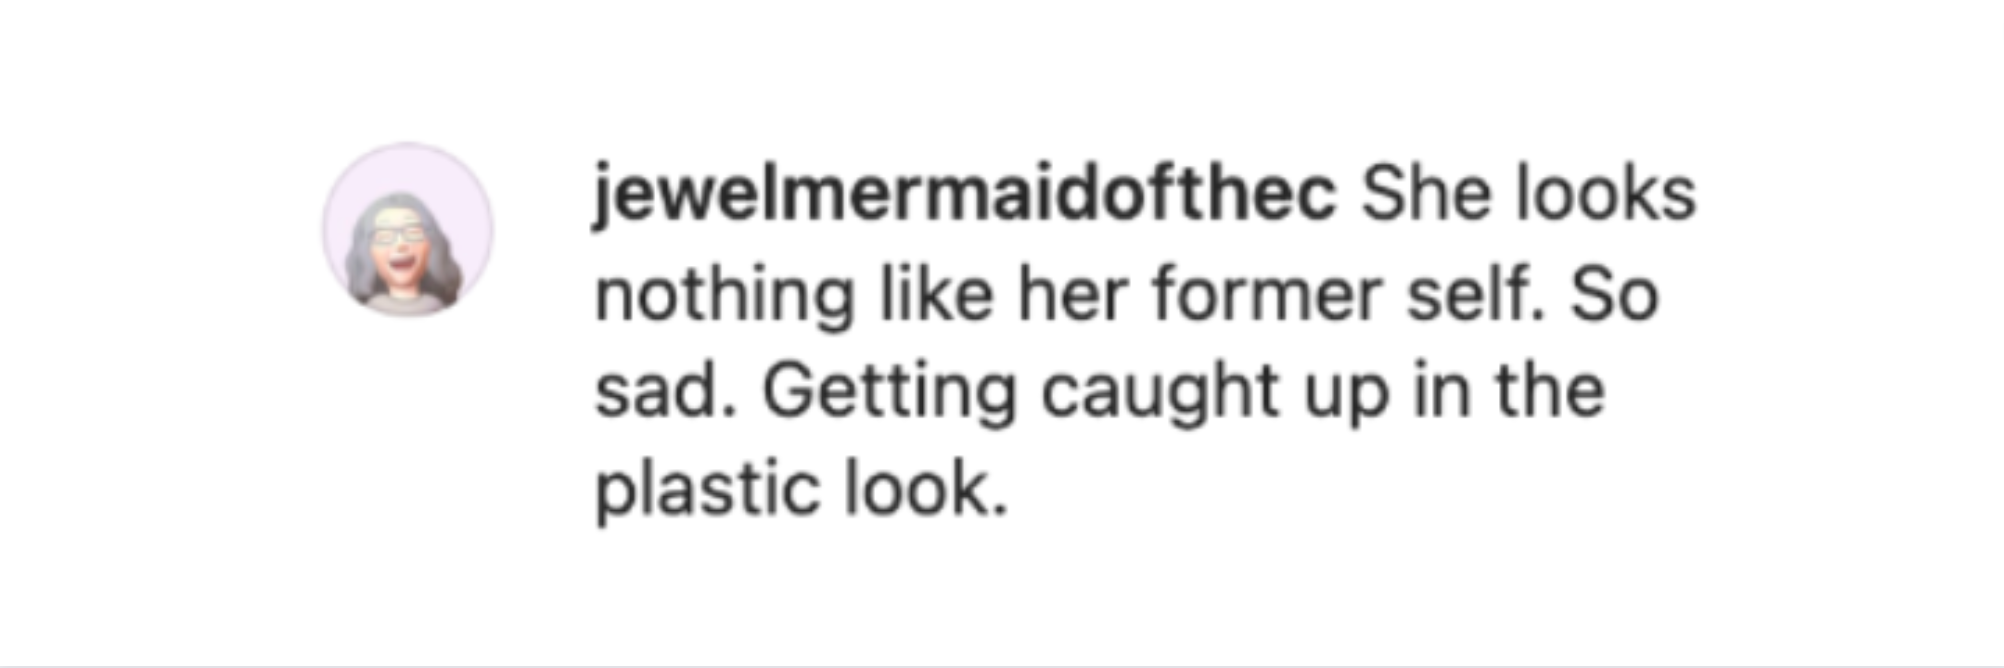 A comment left on a post about Cameron Diaz's appearance in March 2023 | Source: Instagram.com/people